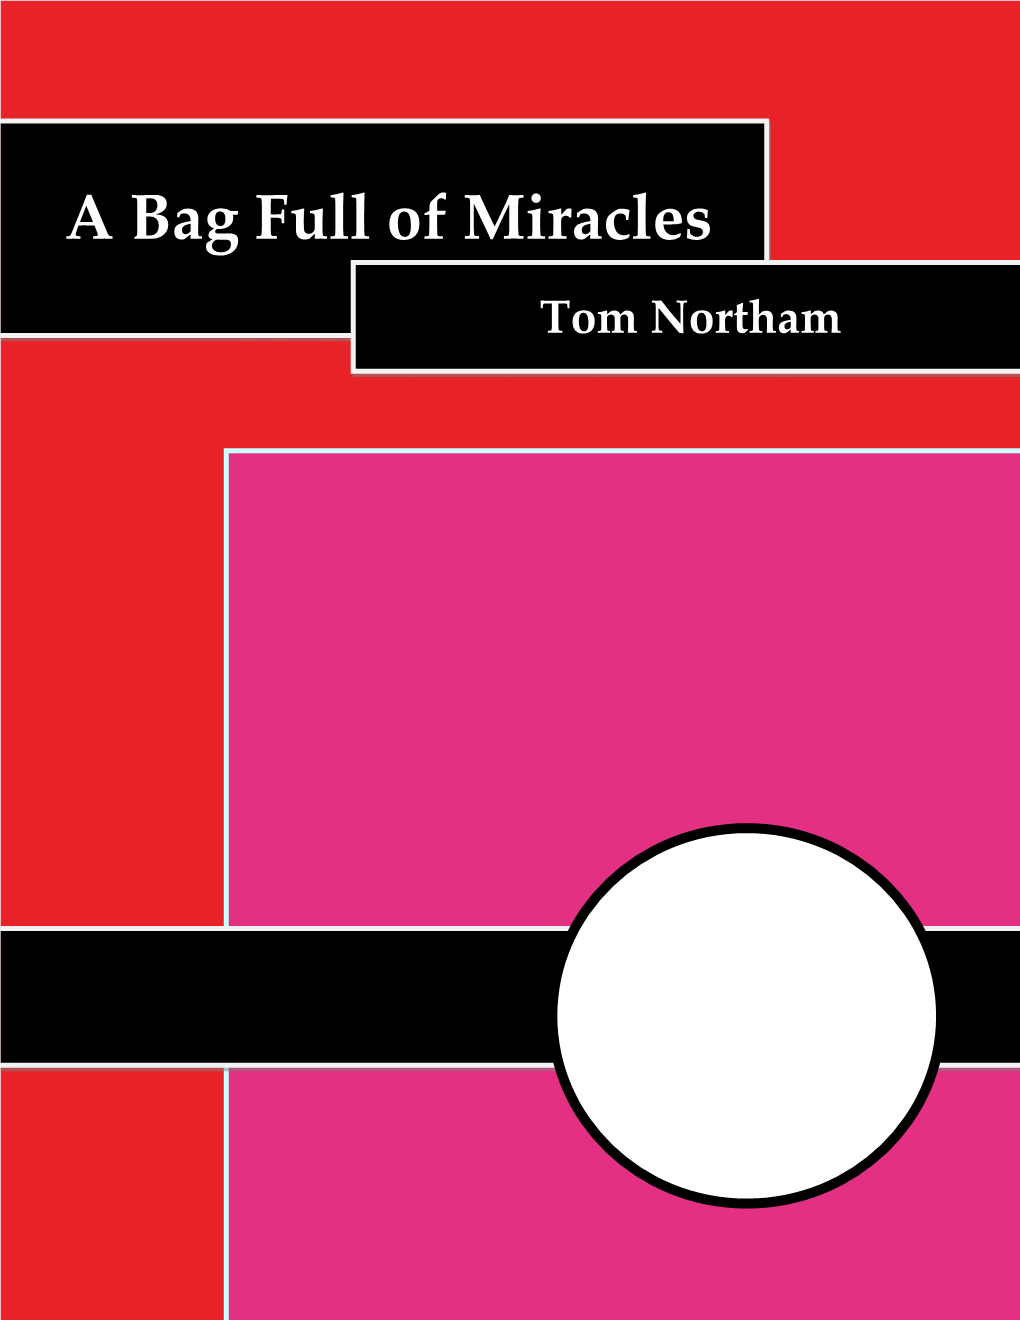 Read a Freeview of a Bag Full of Miracles